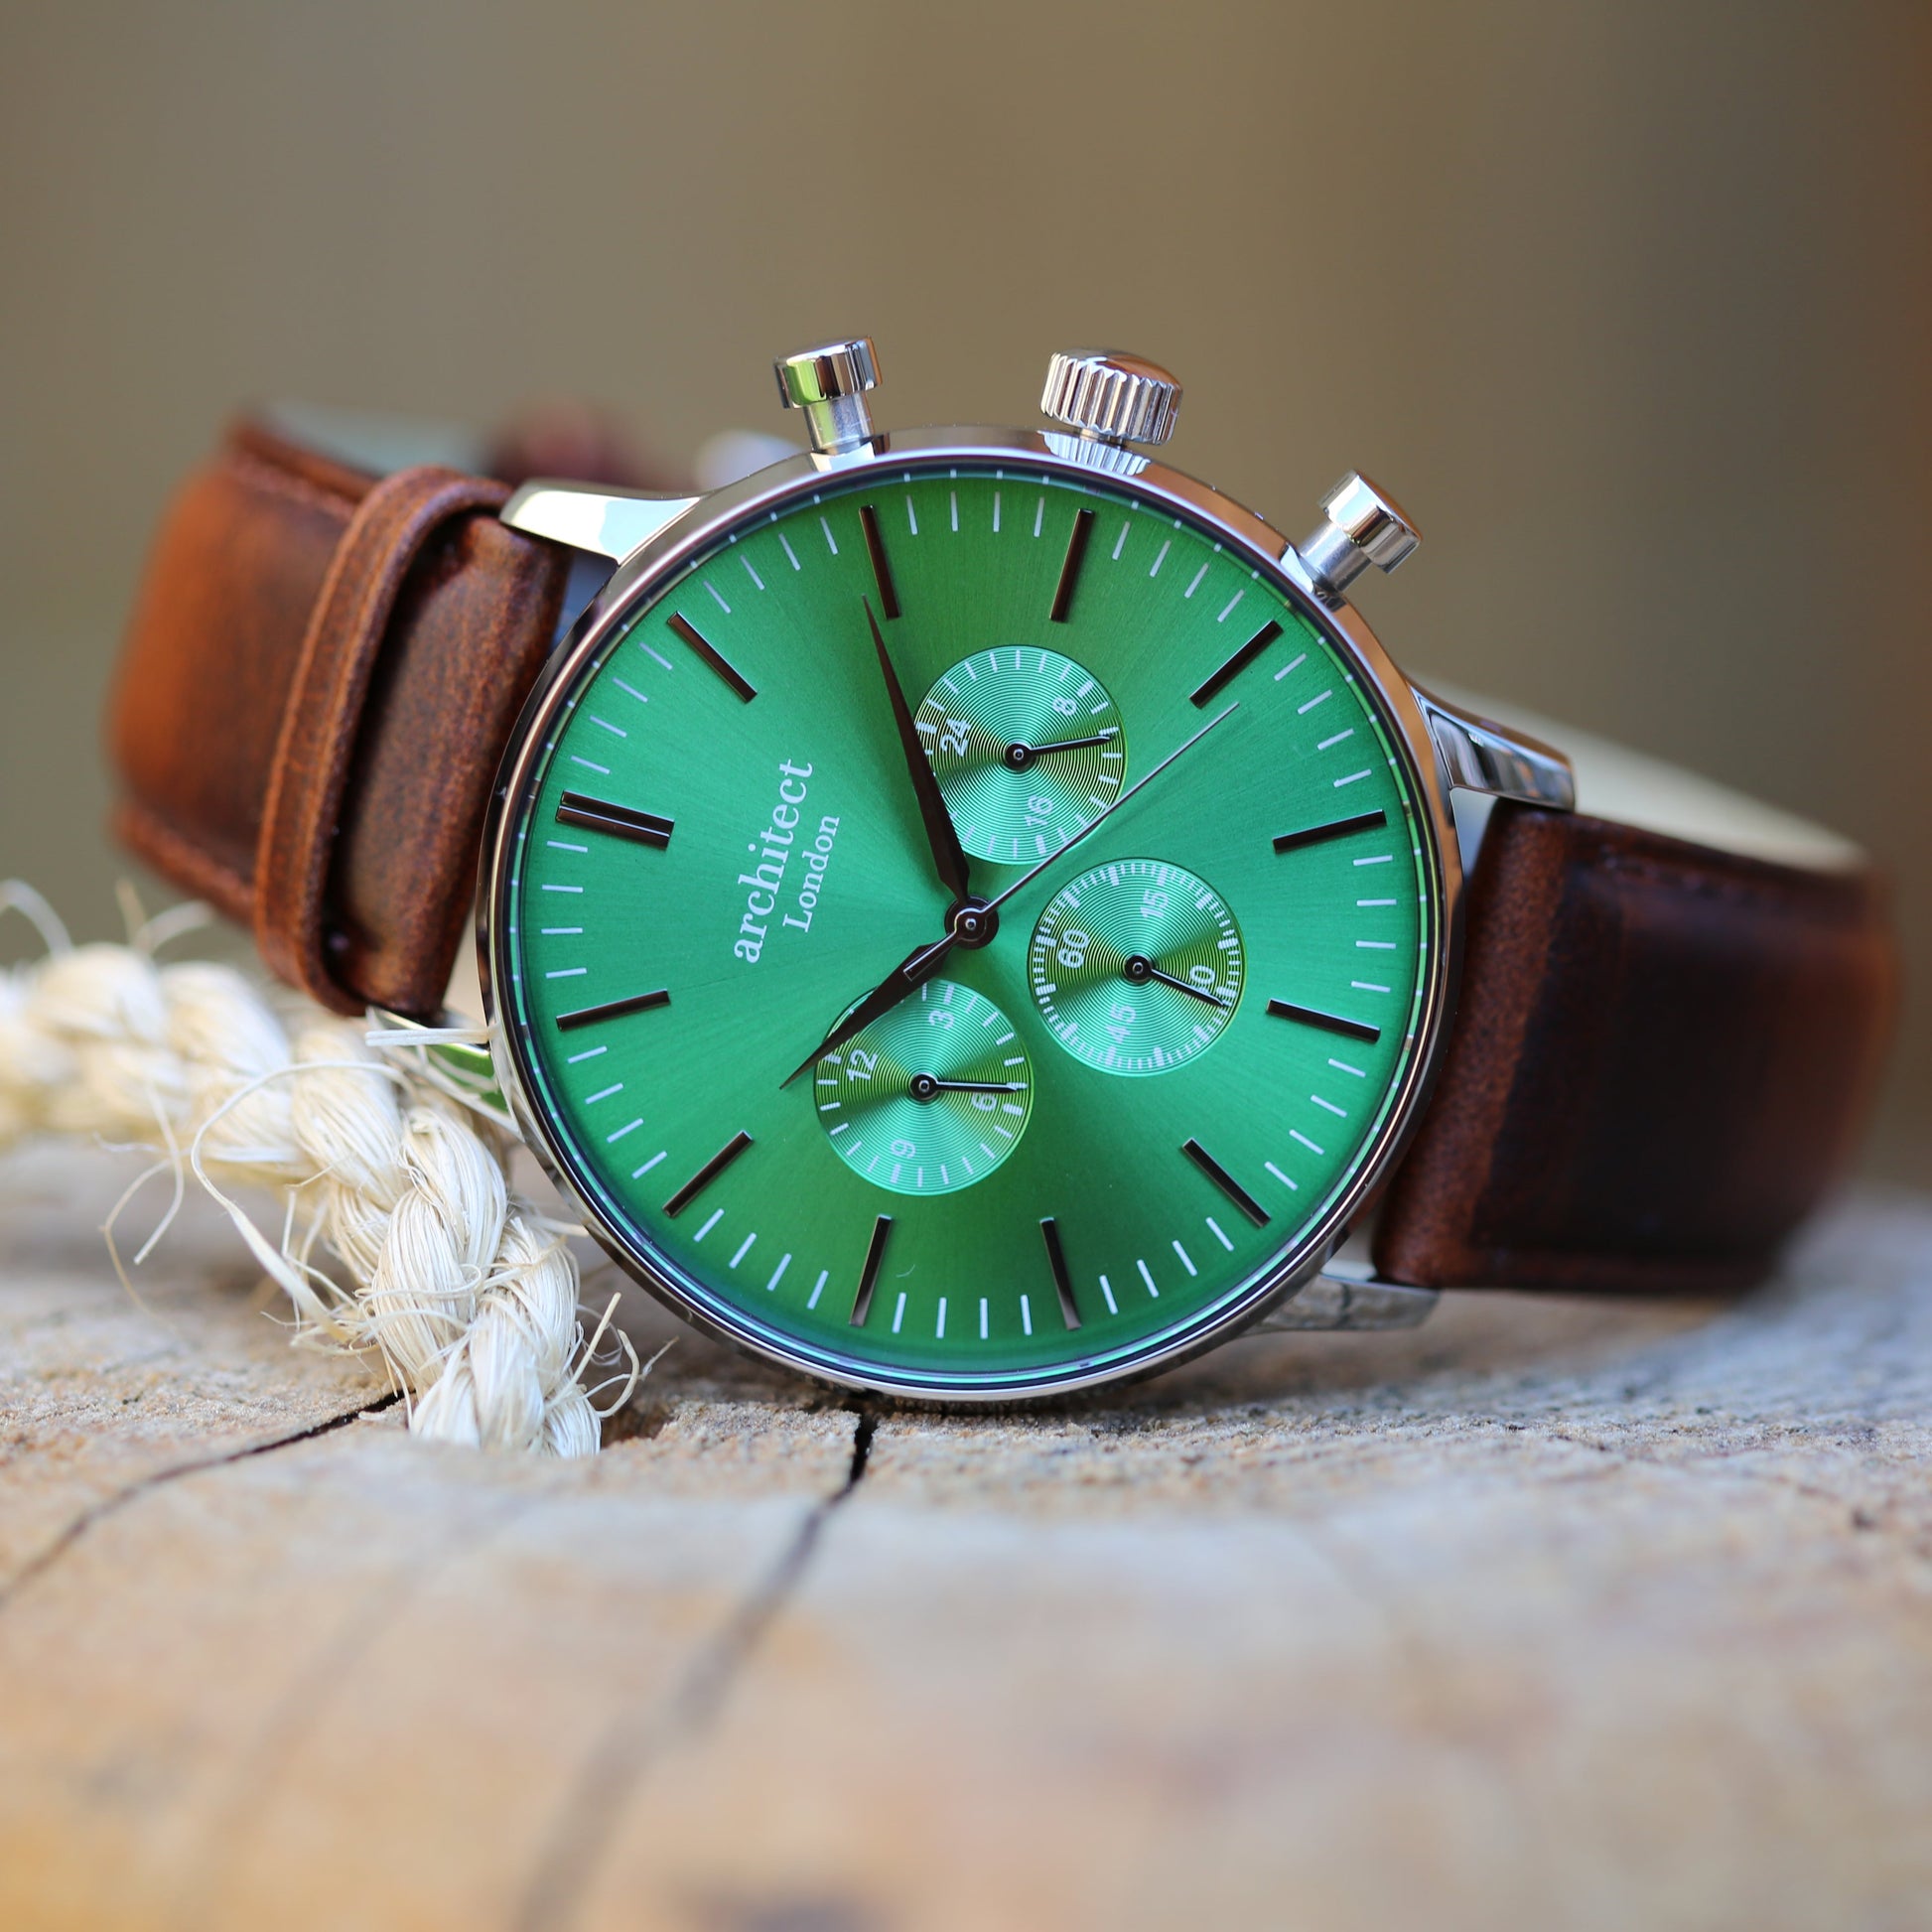 Personalized Men's Watches - Men's Personalized Green Face Watch 